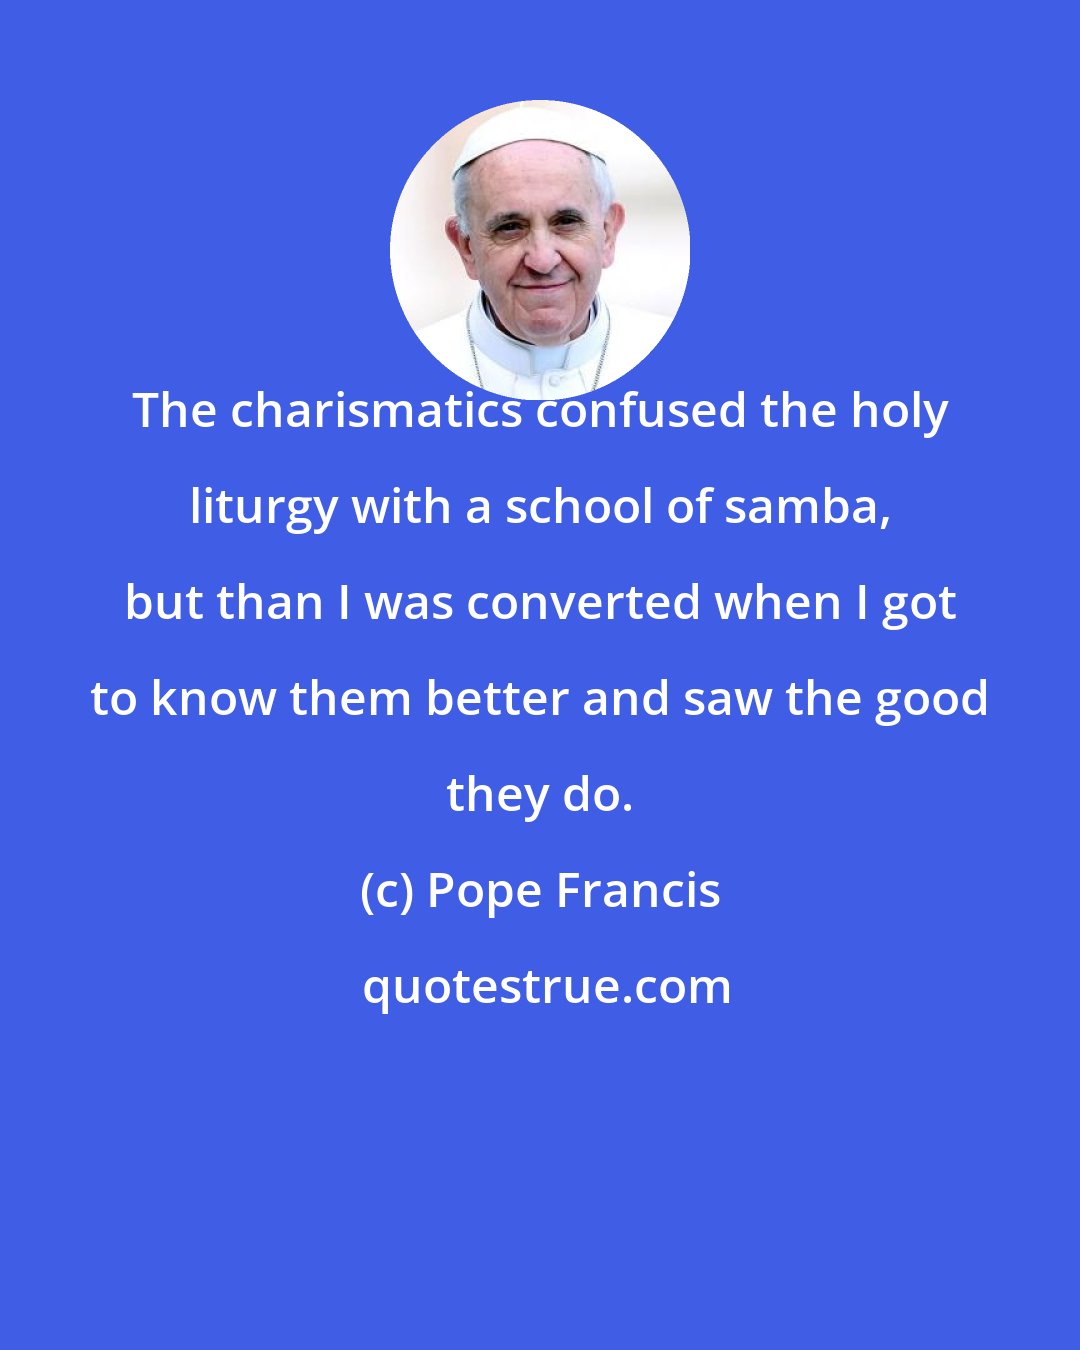 Pope Francis: The charismatics confused the holy liturgy with a school of samba, but than I was converted when I got to know them better and saw the good they do.